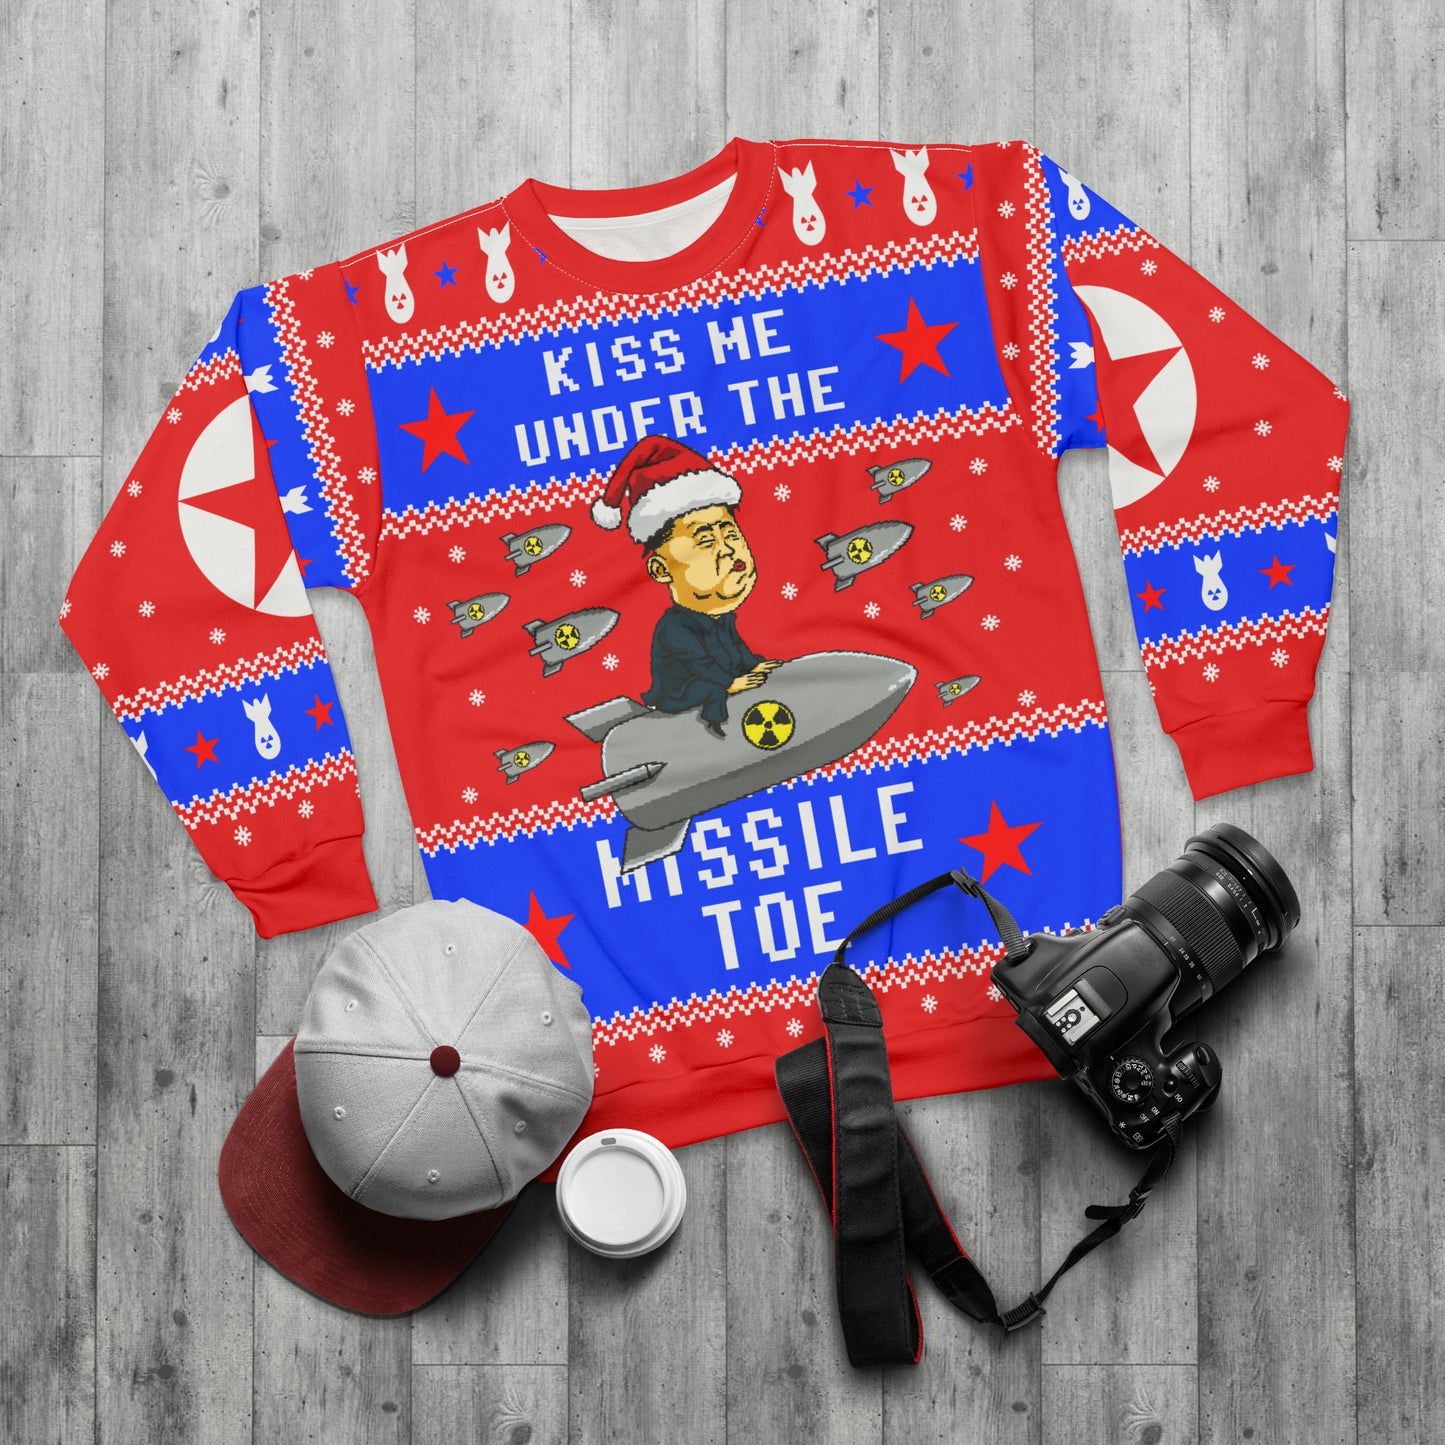 Kiss Me Under the Missile-Toe Sweater!